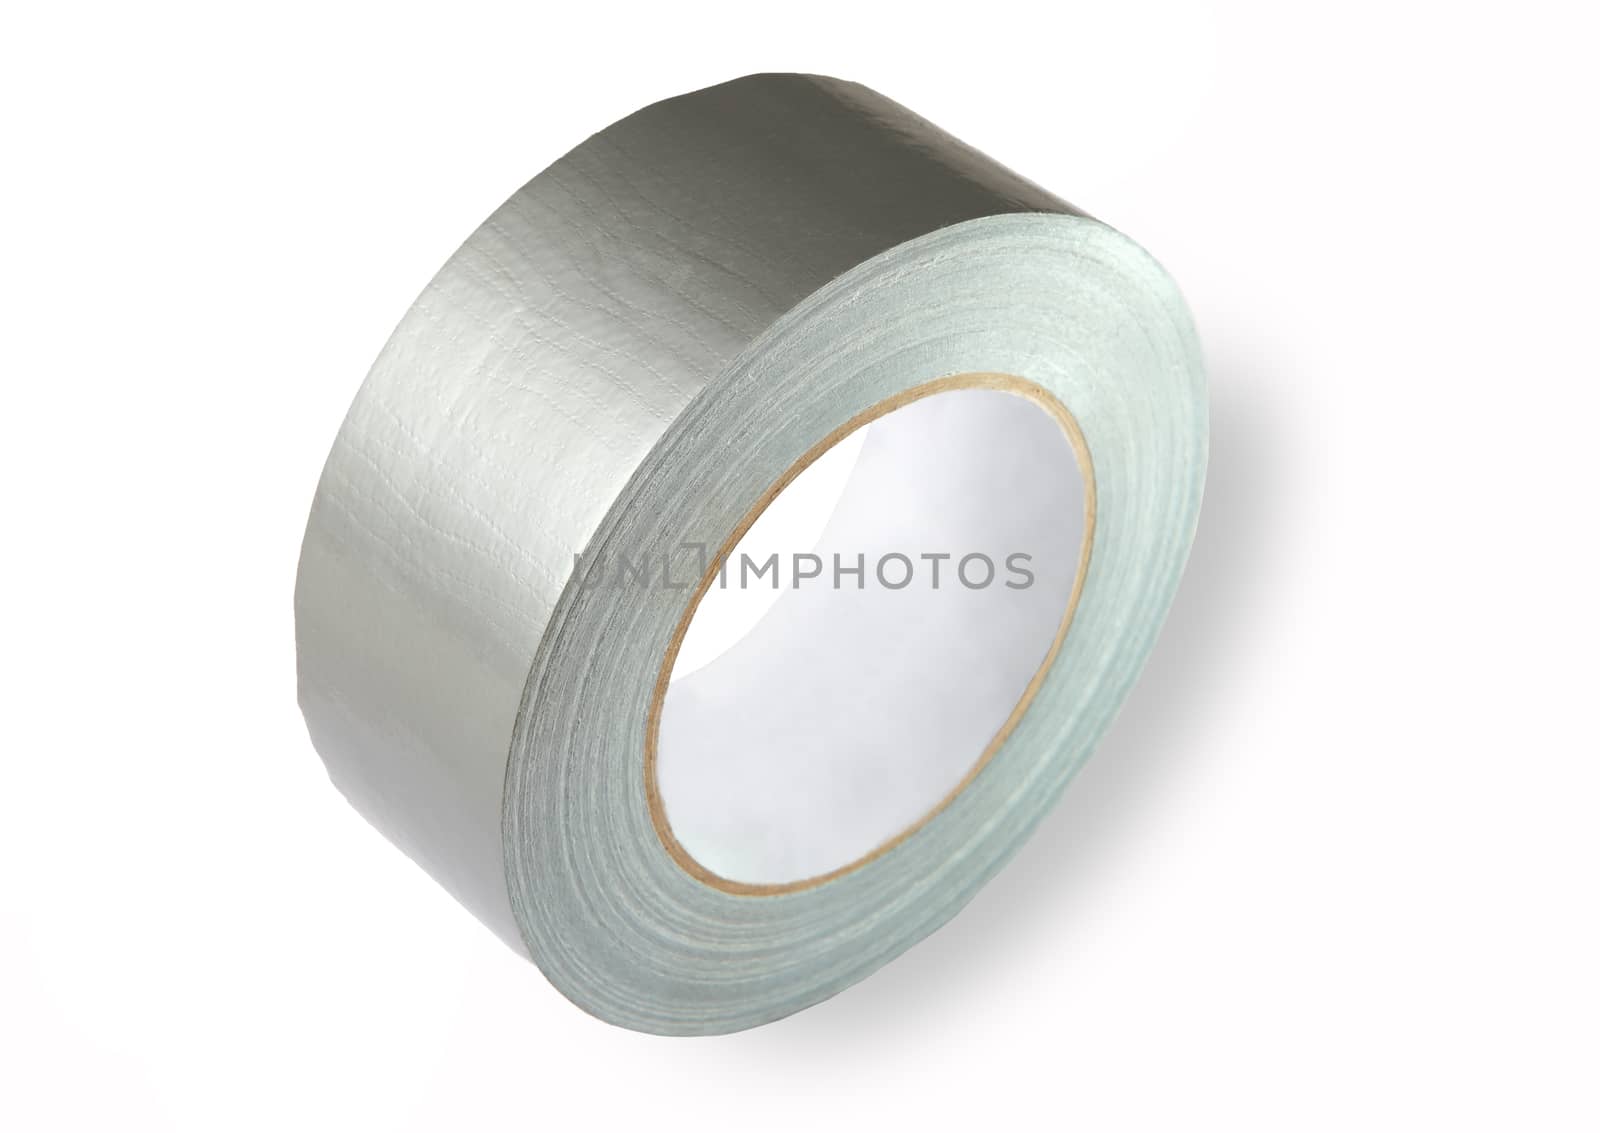 Water proof reinforced adhesive tpl tape (duct), gray color with a metallic sheen, isolated image on white background. by grigvovan